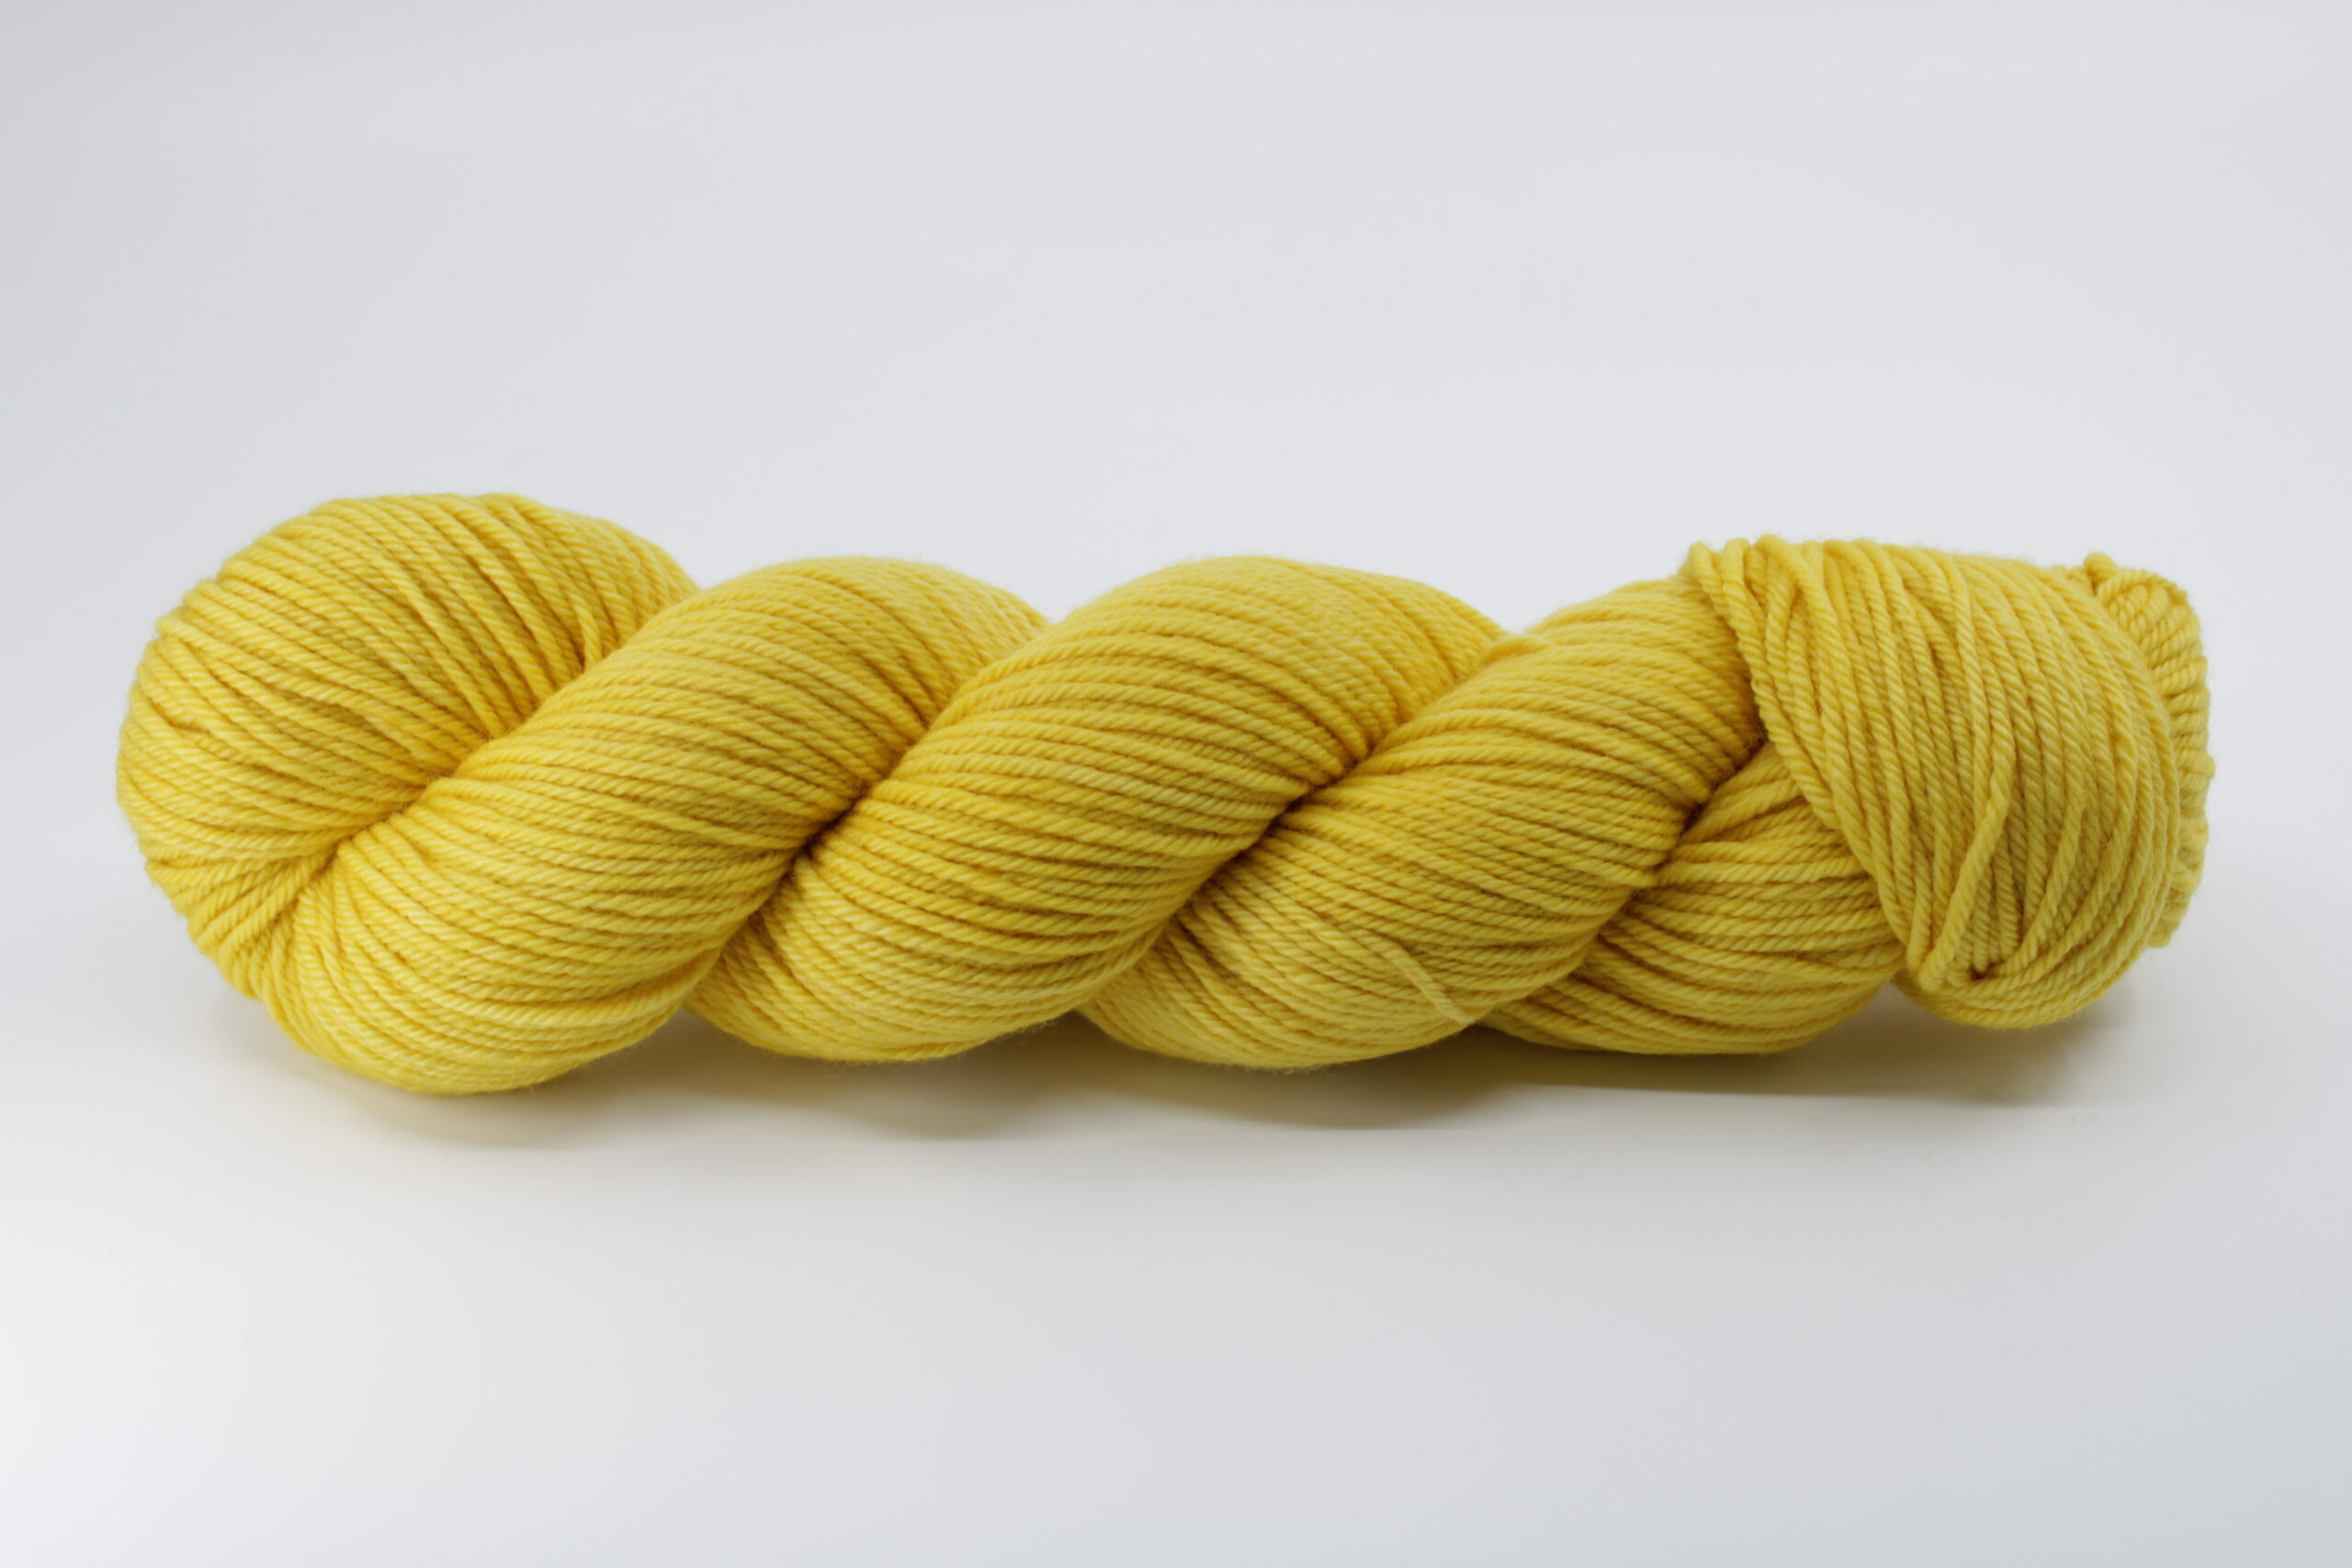 Folcon worsted base. Wool 100% untreated merino. Trio of colors: yellow. Color: Good morning.